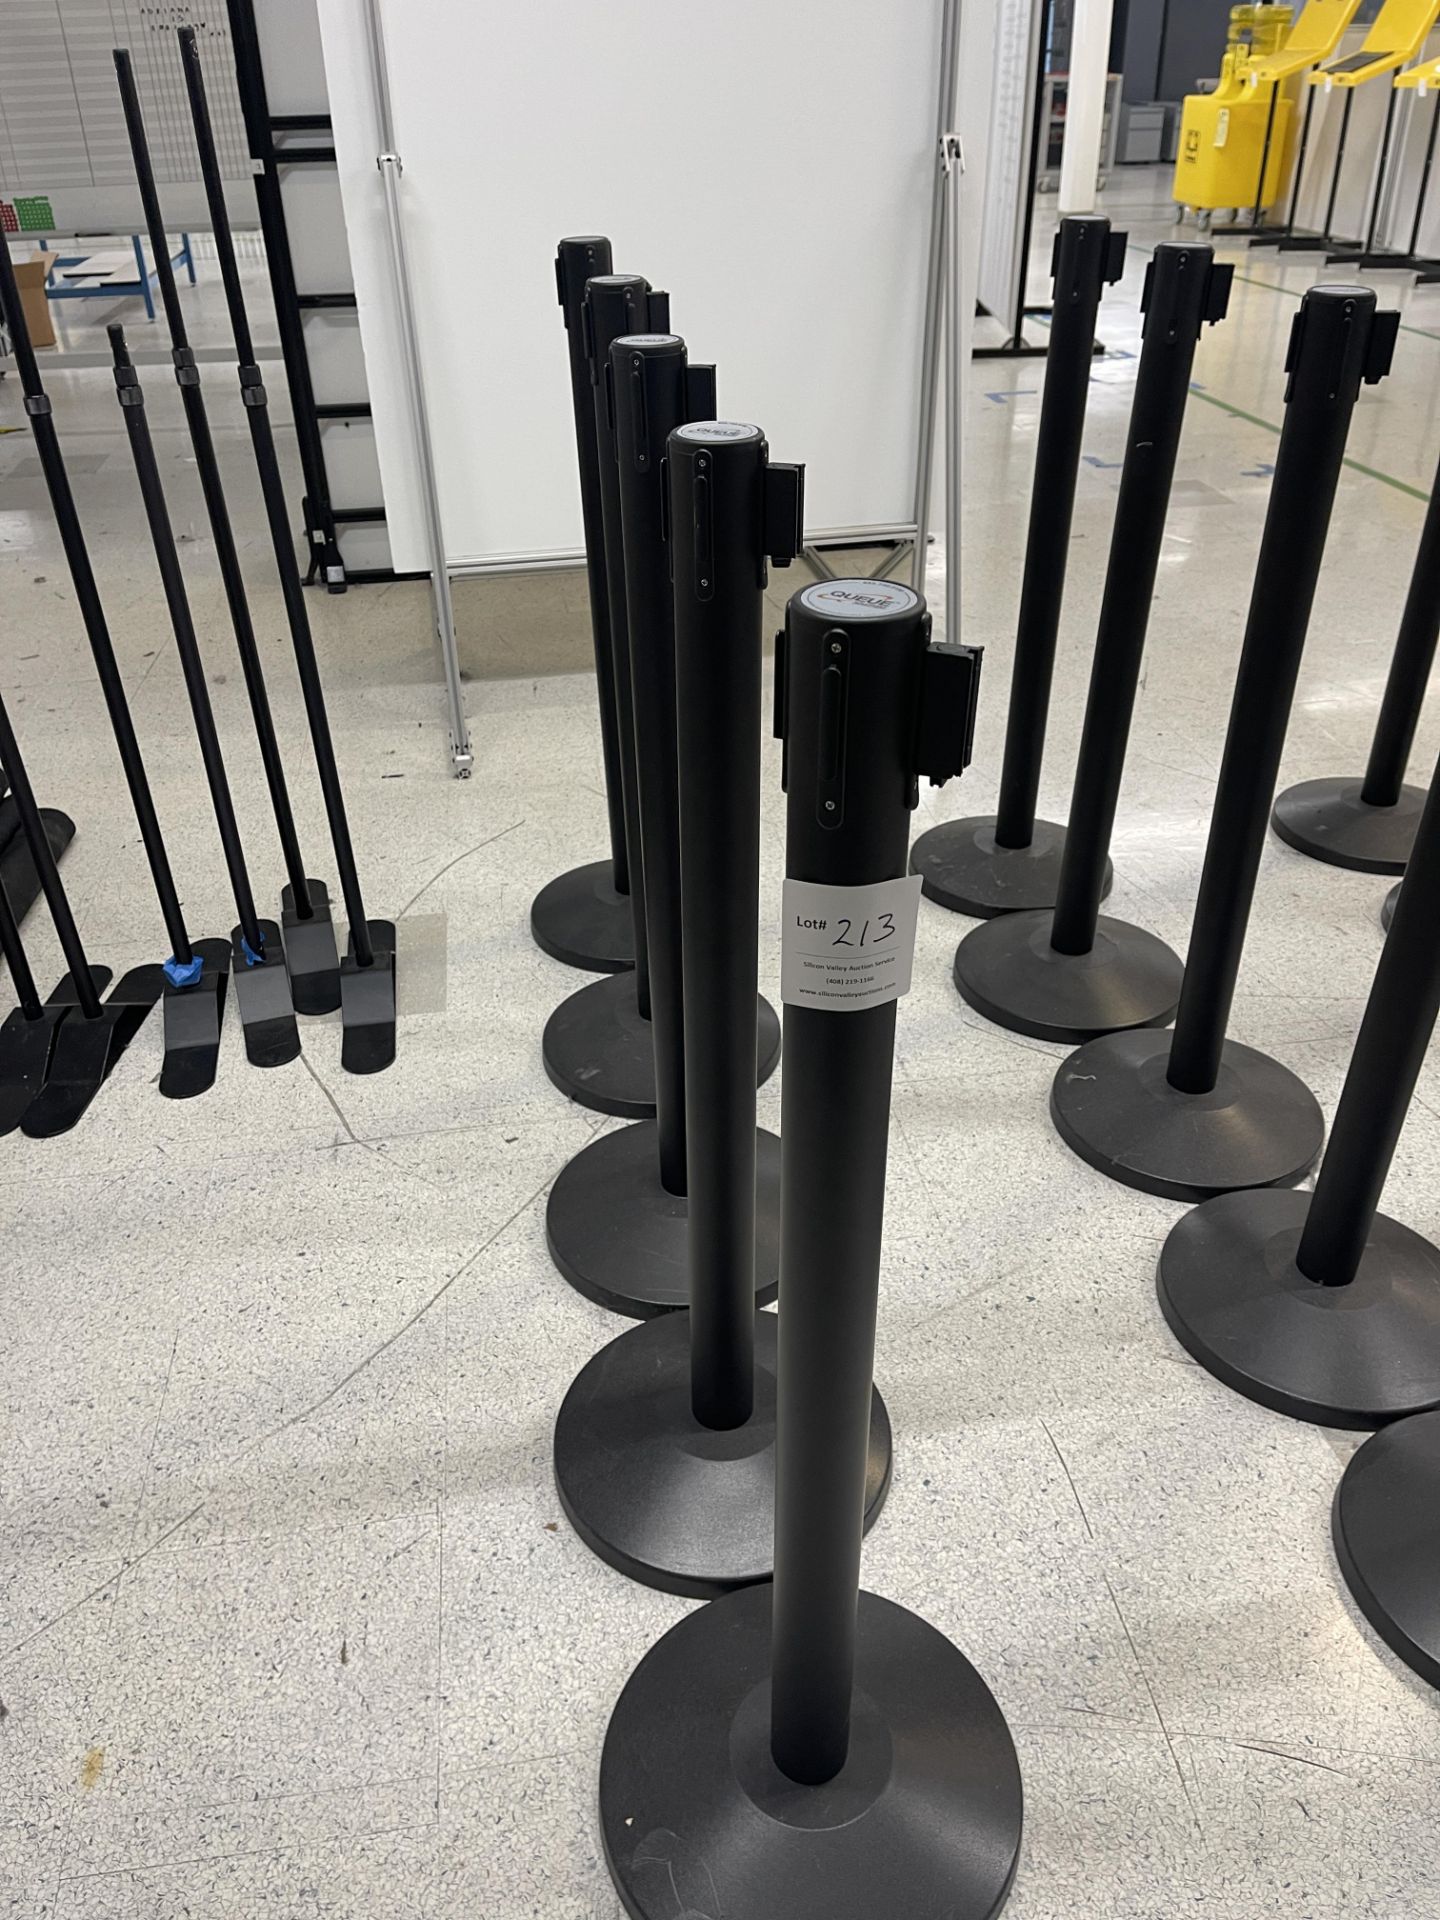 Black stanchion/crowd control barring pots - 5 posts 40" high belt length is 10 ft for each pole